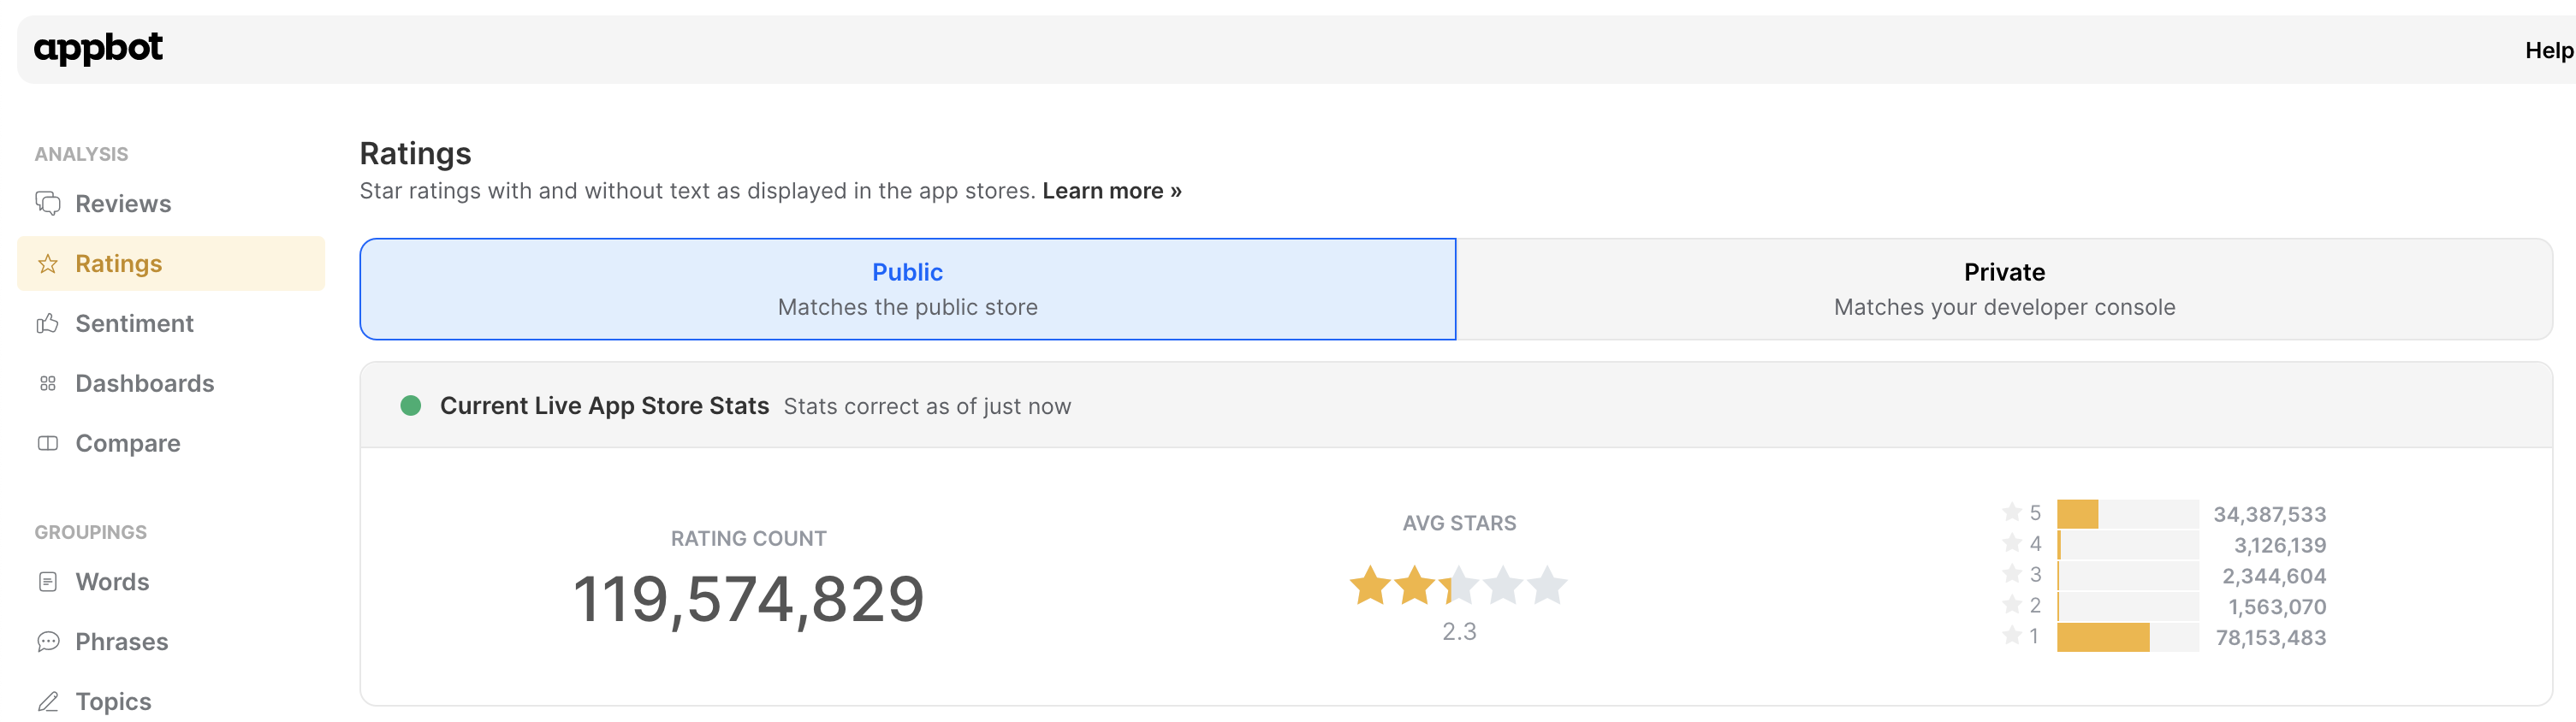 google play rating calculation for public ratings and private ratings